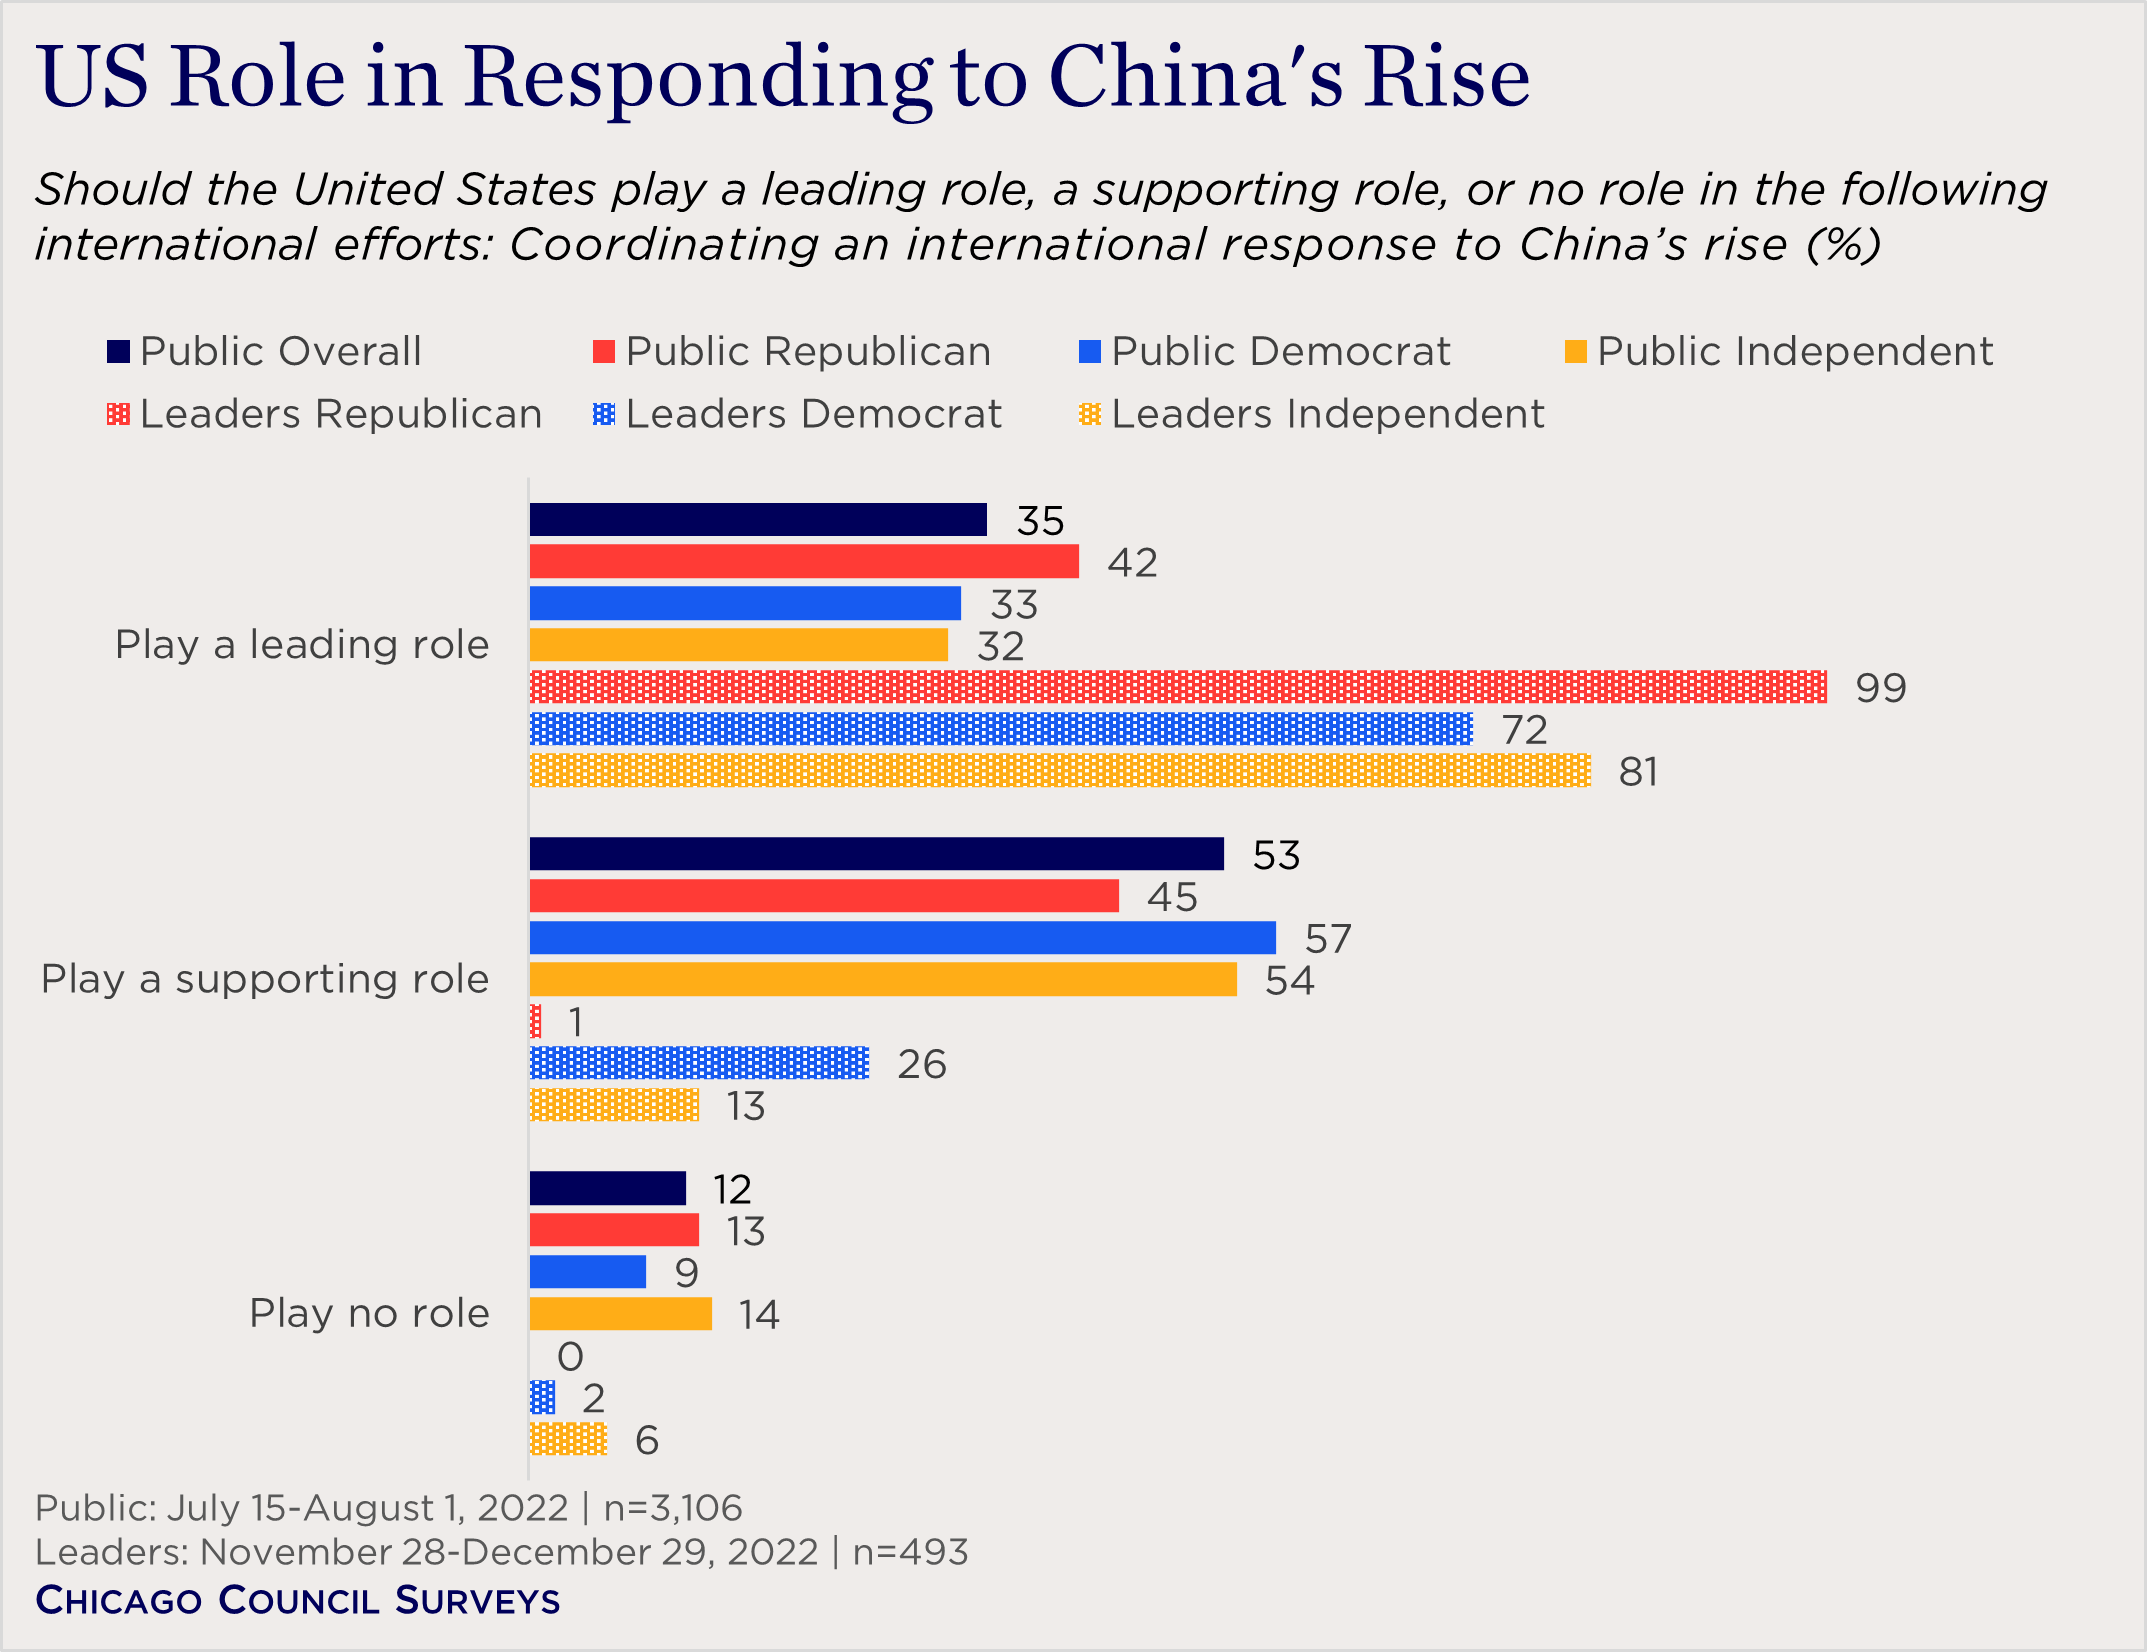 "bar chart showing views of US role in responding to China's rise"